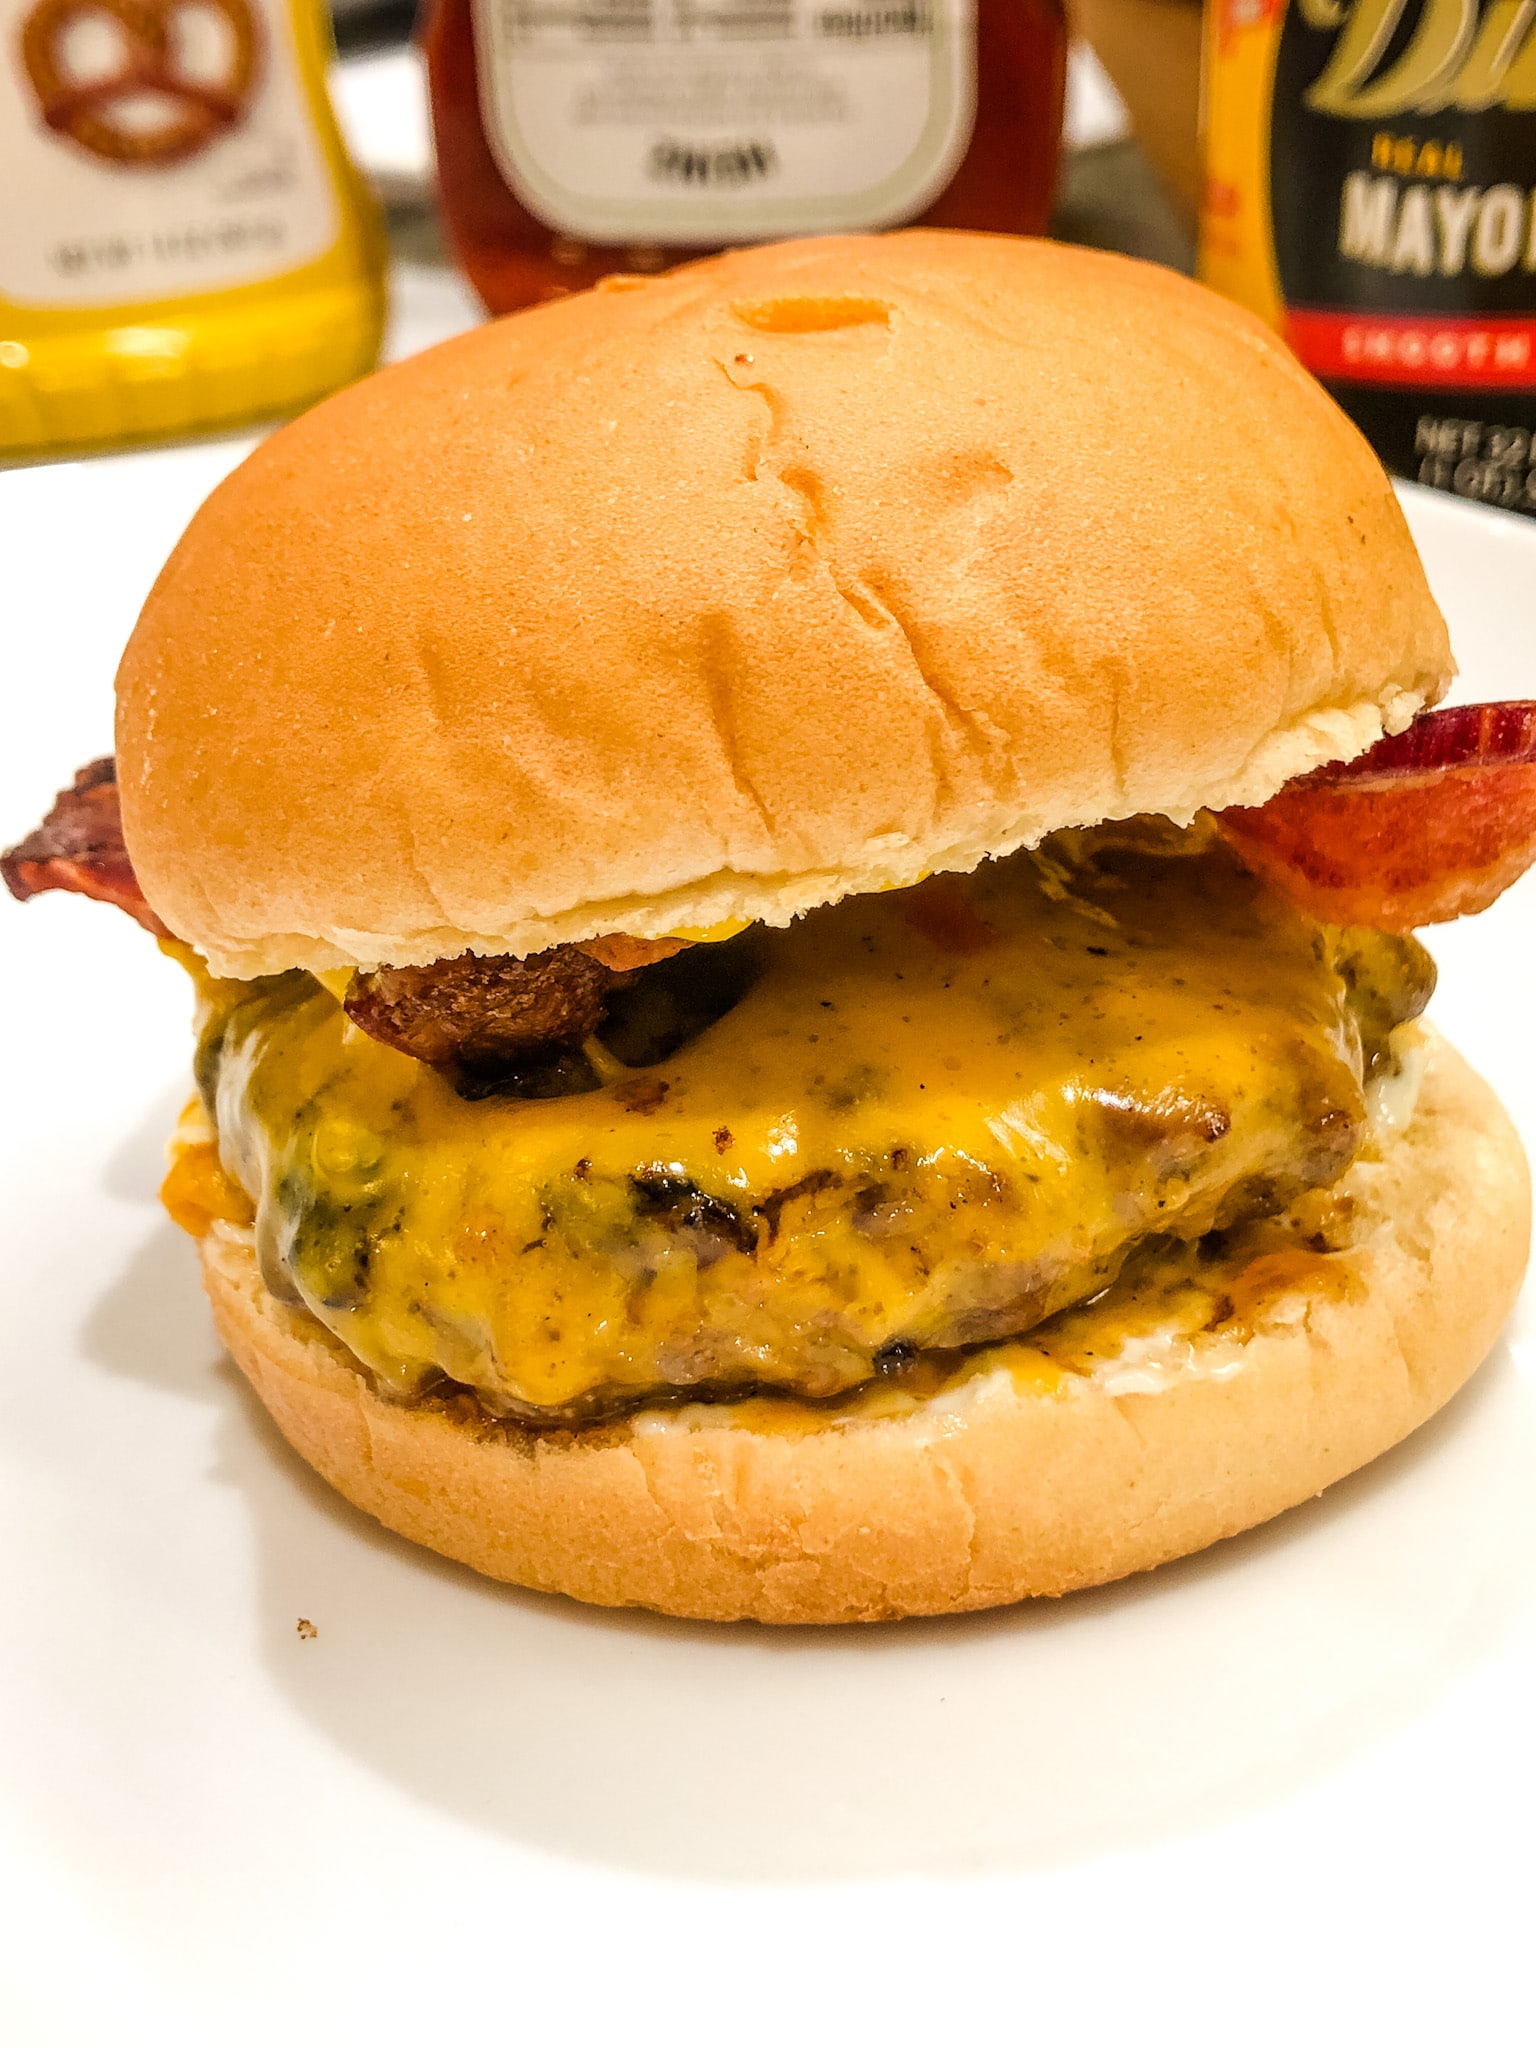 Here's How To Make The Cheeseburger From 'The Menu